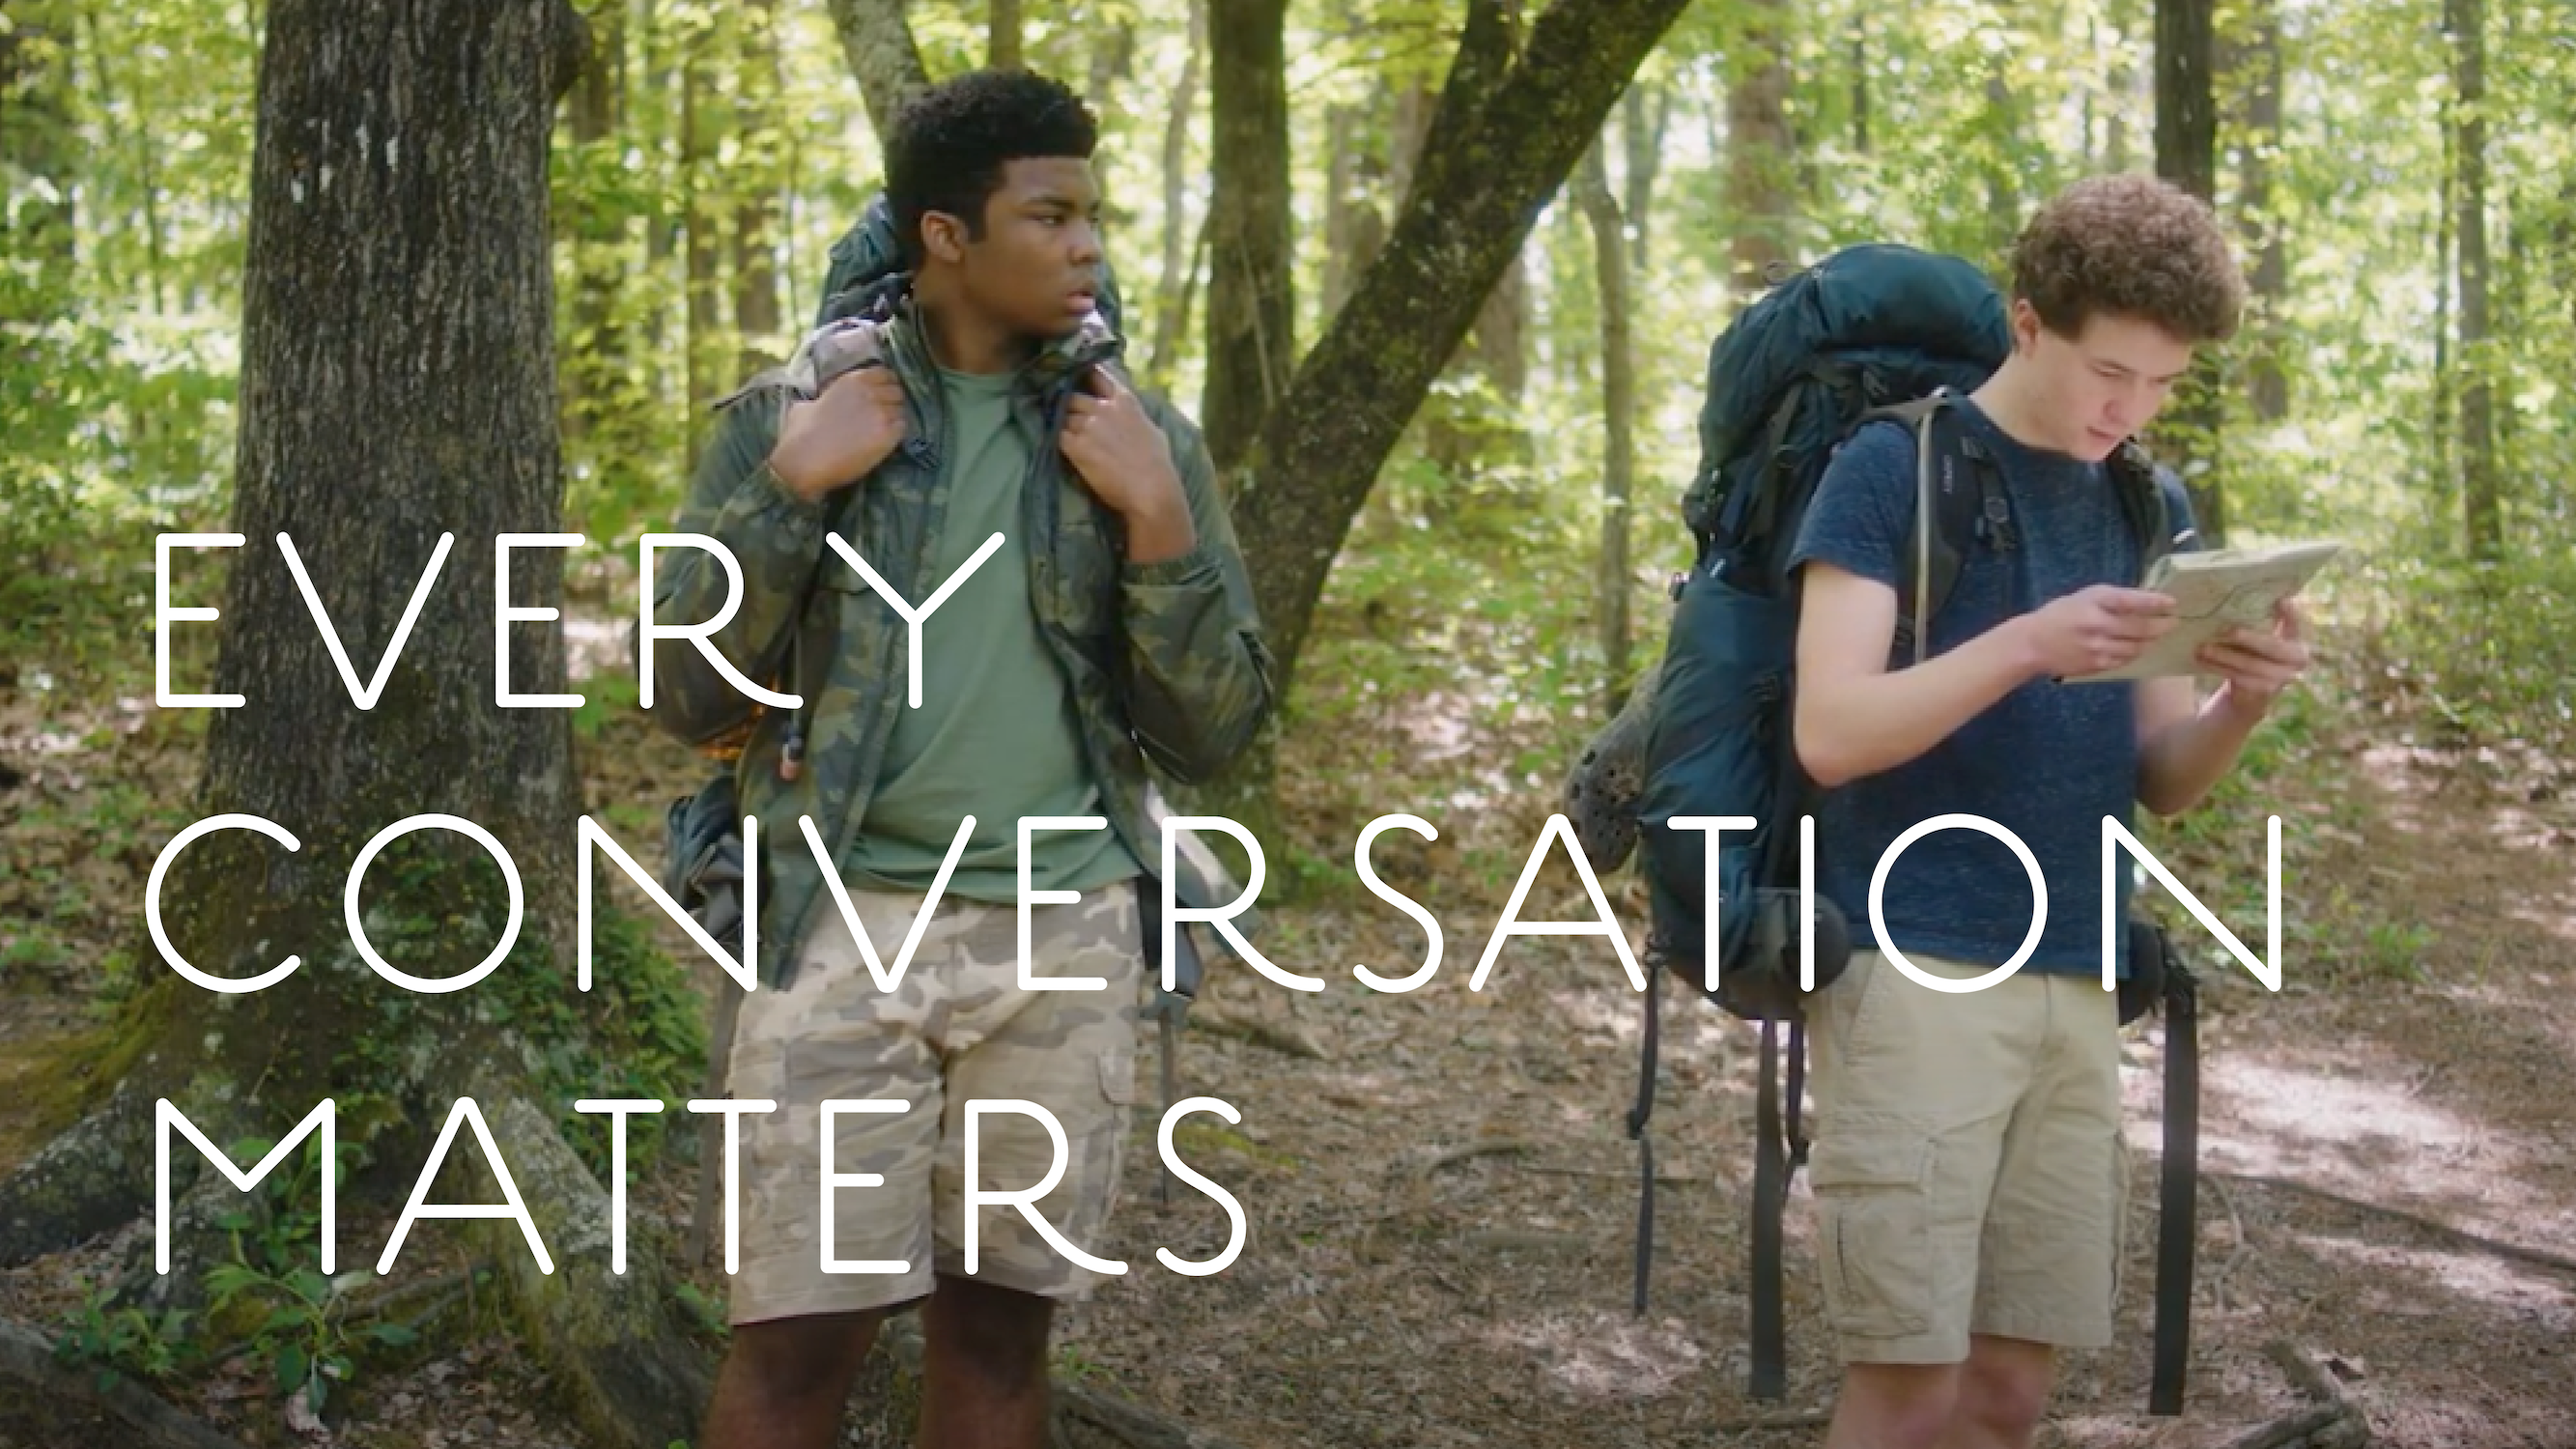 Every Conversation Matters: Lost in the Woods